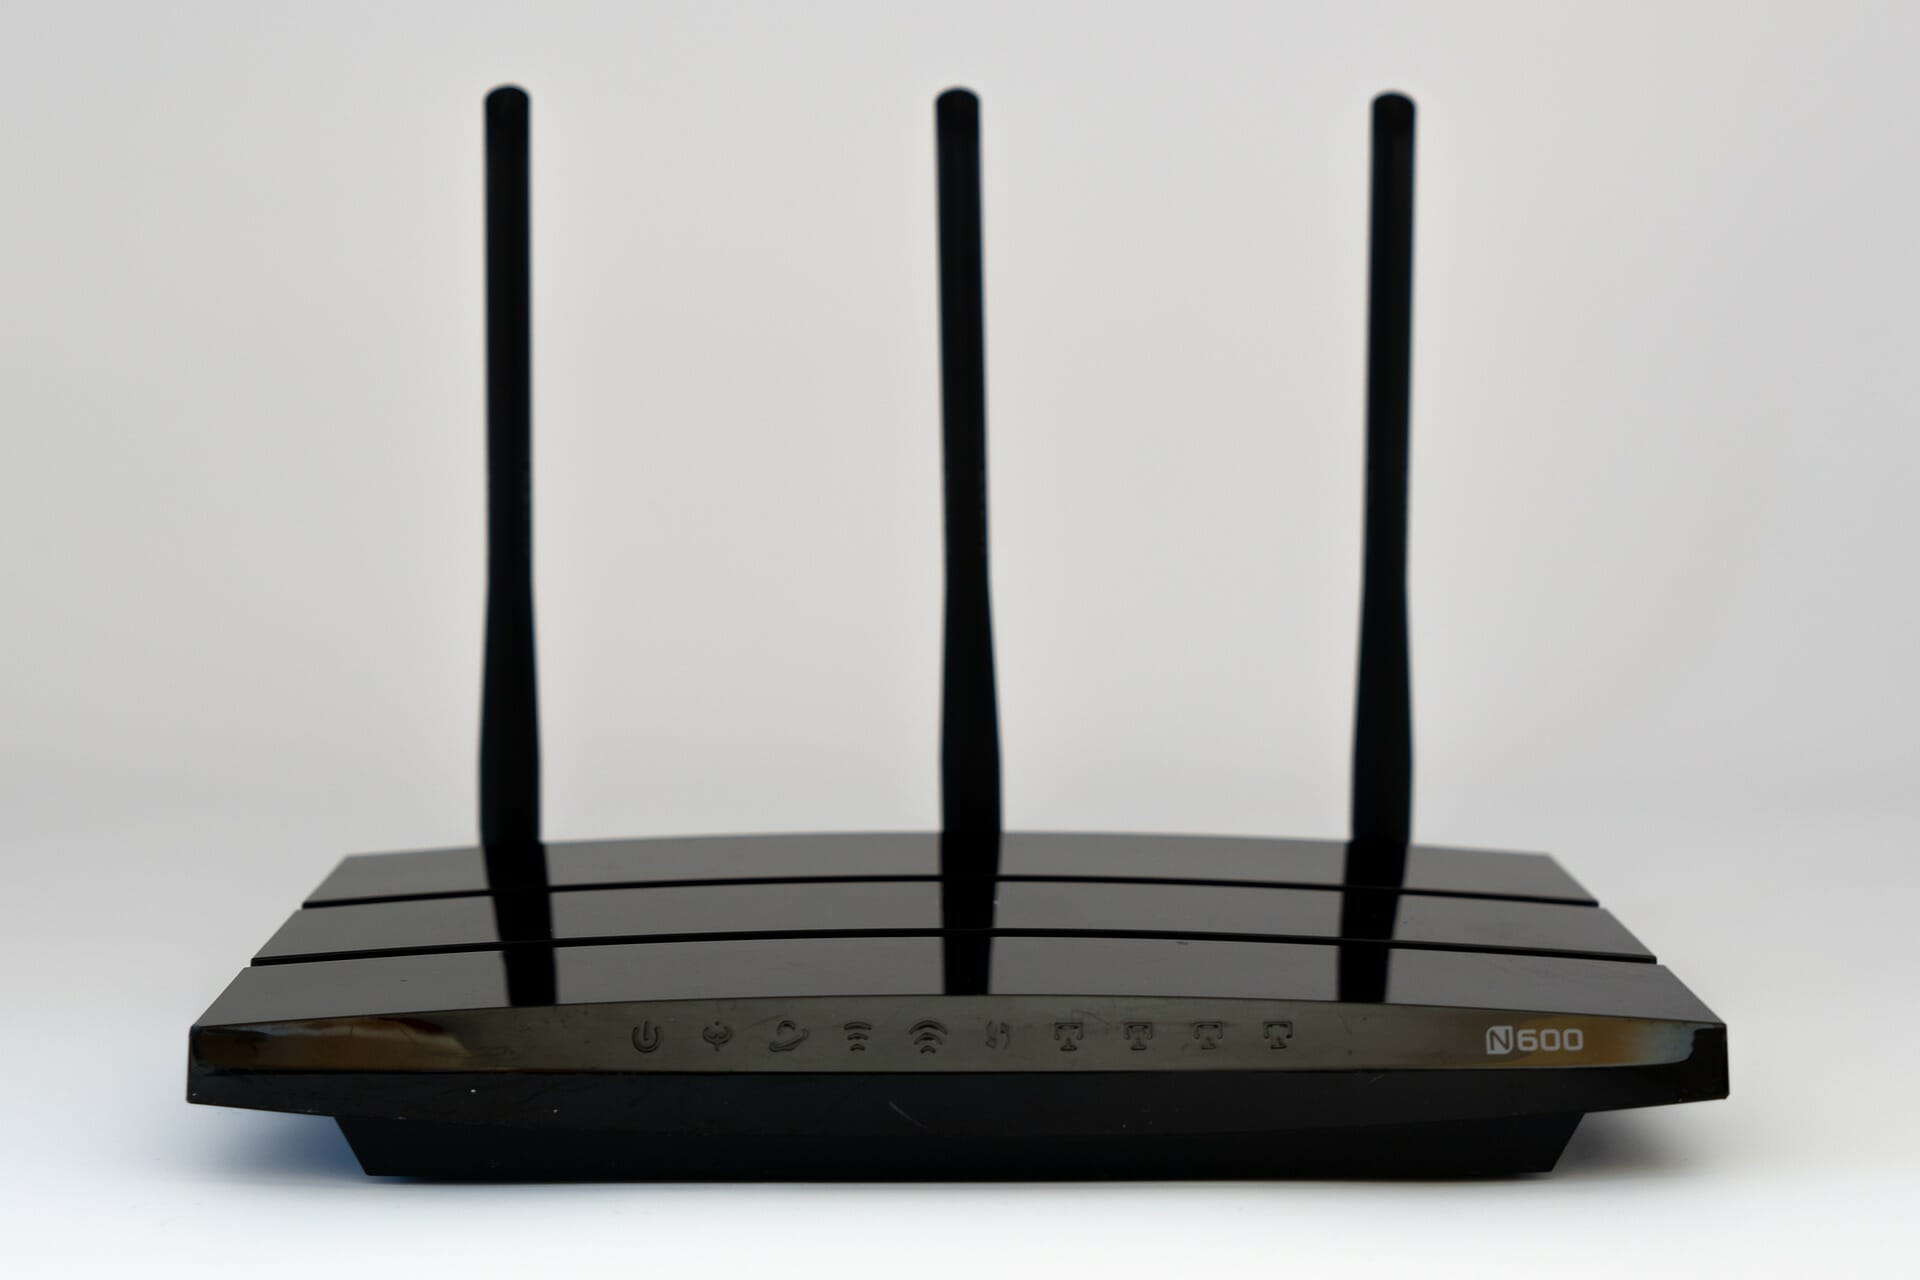 Windows can’t get the network settings from the router [7 fixes]